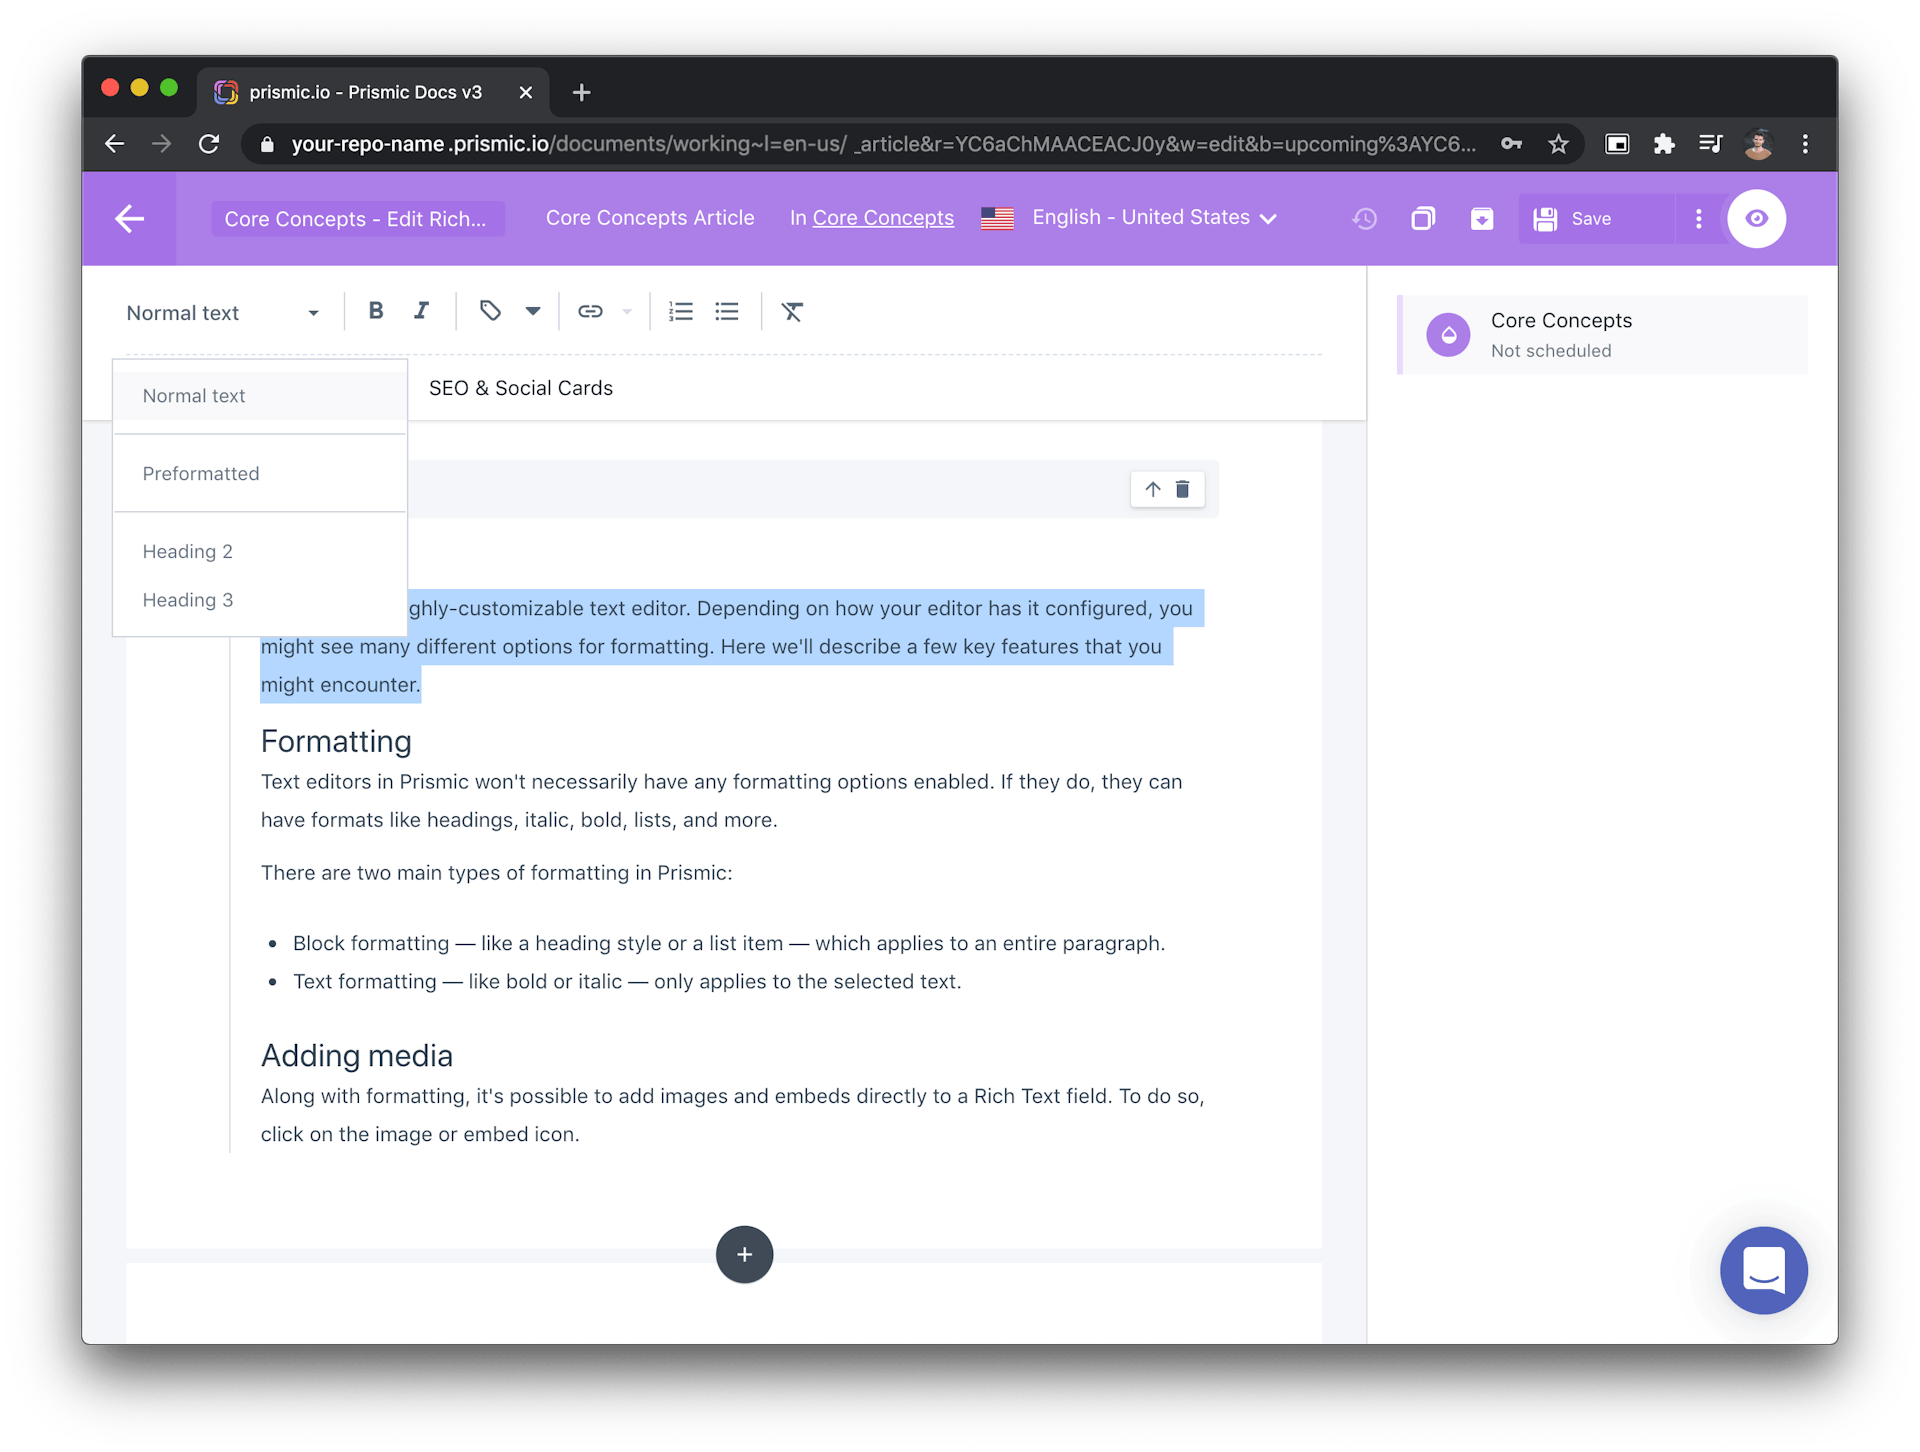 Rich text field in the document editor